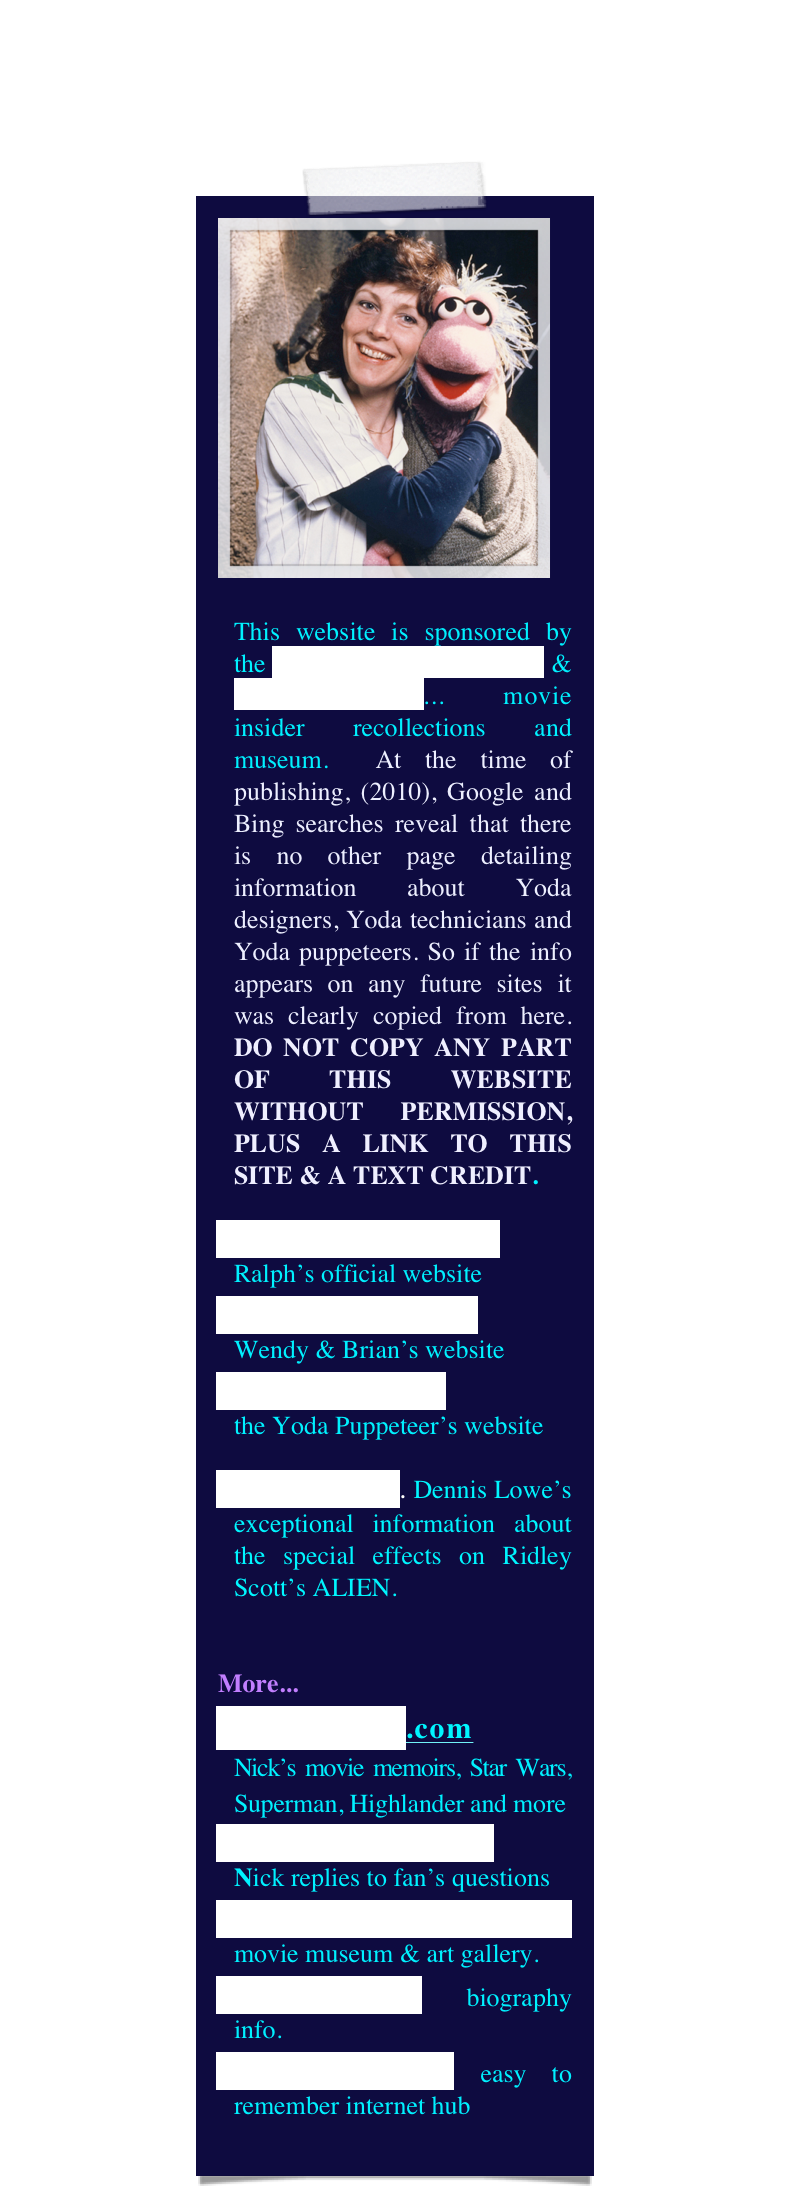 ￼

This website is sponsored by the Yoda Guy Movie Exhibit & CineSecrets.com... movie insider recollections and museum.  At the time of publishing, (2010), Google and Bing searches reveal that there is no other page detailing information about Yoda designers, Yoda technicians and Yoda puppeteers. So if the info appears on any future sites it was clearly copied from here. DO NOT COPY ANY PART OF THIS WEBSITE WITHOUT PERMISSION, PLUS A LINK TO THIS SITE & A TEXT CREDIT.
RalphMcQuarrie.com
Ralph’s official website
The World of Froud
Wendy & Brian’s website
DaveBarclay.com 
the Yoda Puppeteer’s website
Alien Makers. Dennis Lowe’s exceptional information about the special effects on Ridley Scott’s ALIEN.


More...
CineSecrets.com 
Nick’s movie memoirs, Star Wars, Superman, Highlander and more
Questions & Answers   
Nick replies to fan’s questions
YodaGuyMovieExhibit movie museum & art gallery.
NickMaley.com biography info.
thatYodaGuy.com easy to remember internet hub